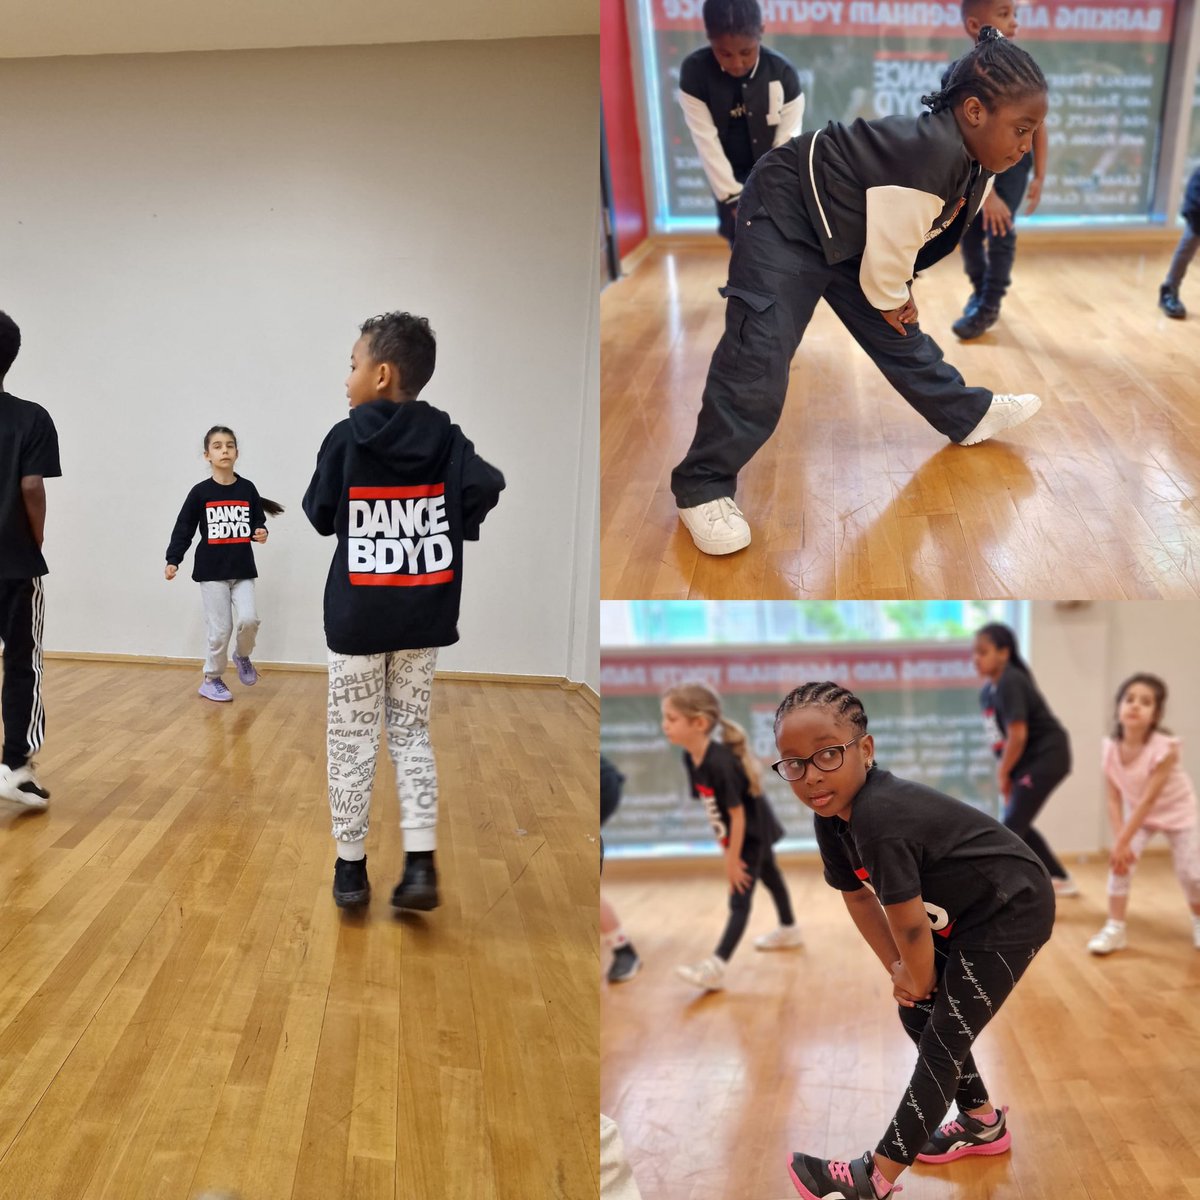 #wednesdaywellness delivering physical activities for young people to build strength, improve mental well-being and brain stimulation 🧠👏
•
#improve #betteryourself #beaforce 
•
@LMFoundation_ @LDN_VRU @LondonYouth @trustforlondon @LightbulbTrust #strongerfutures